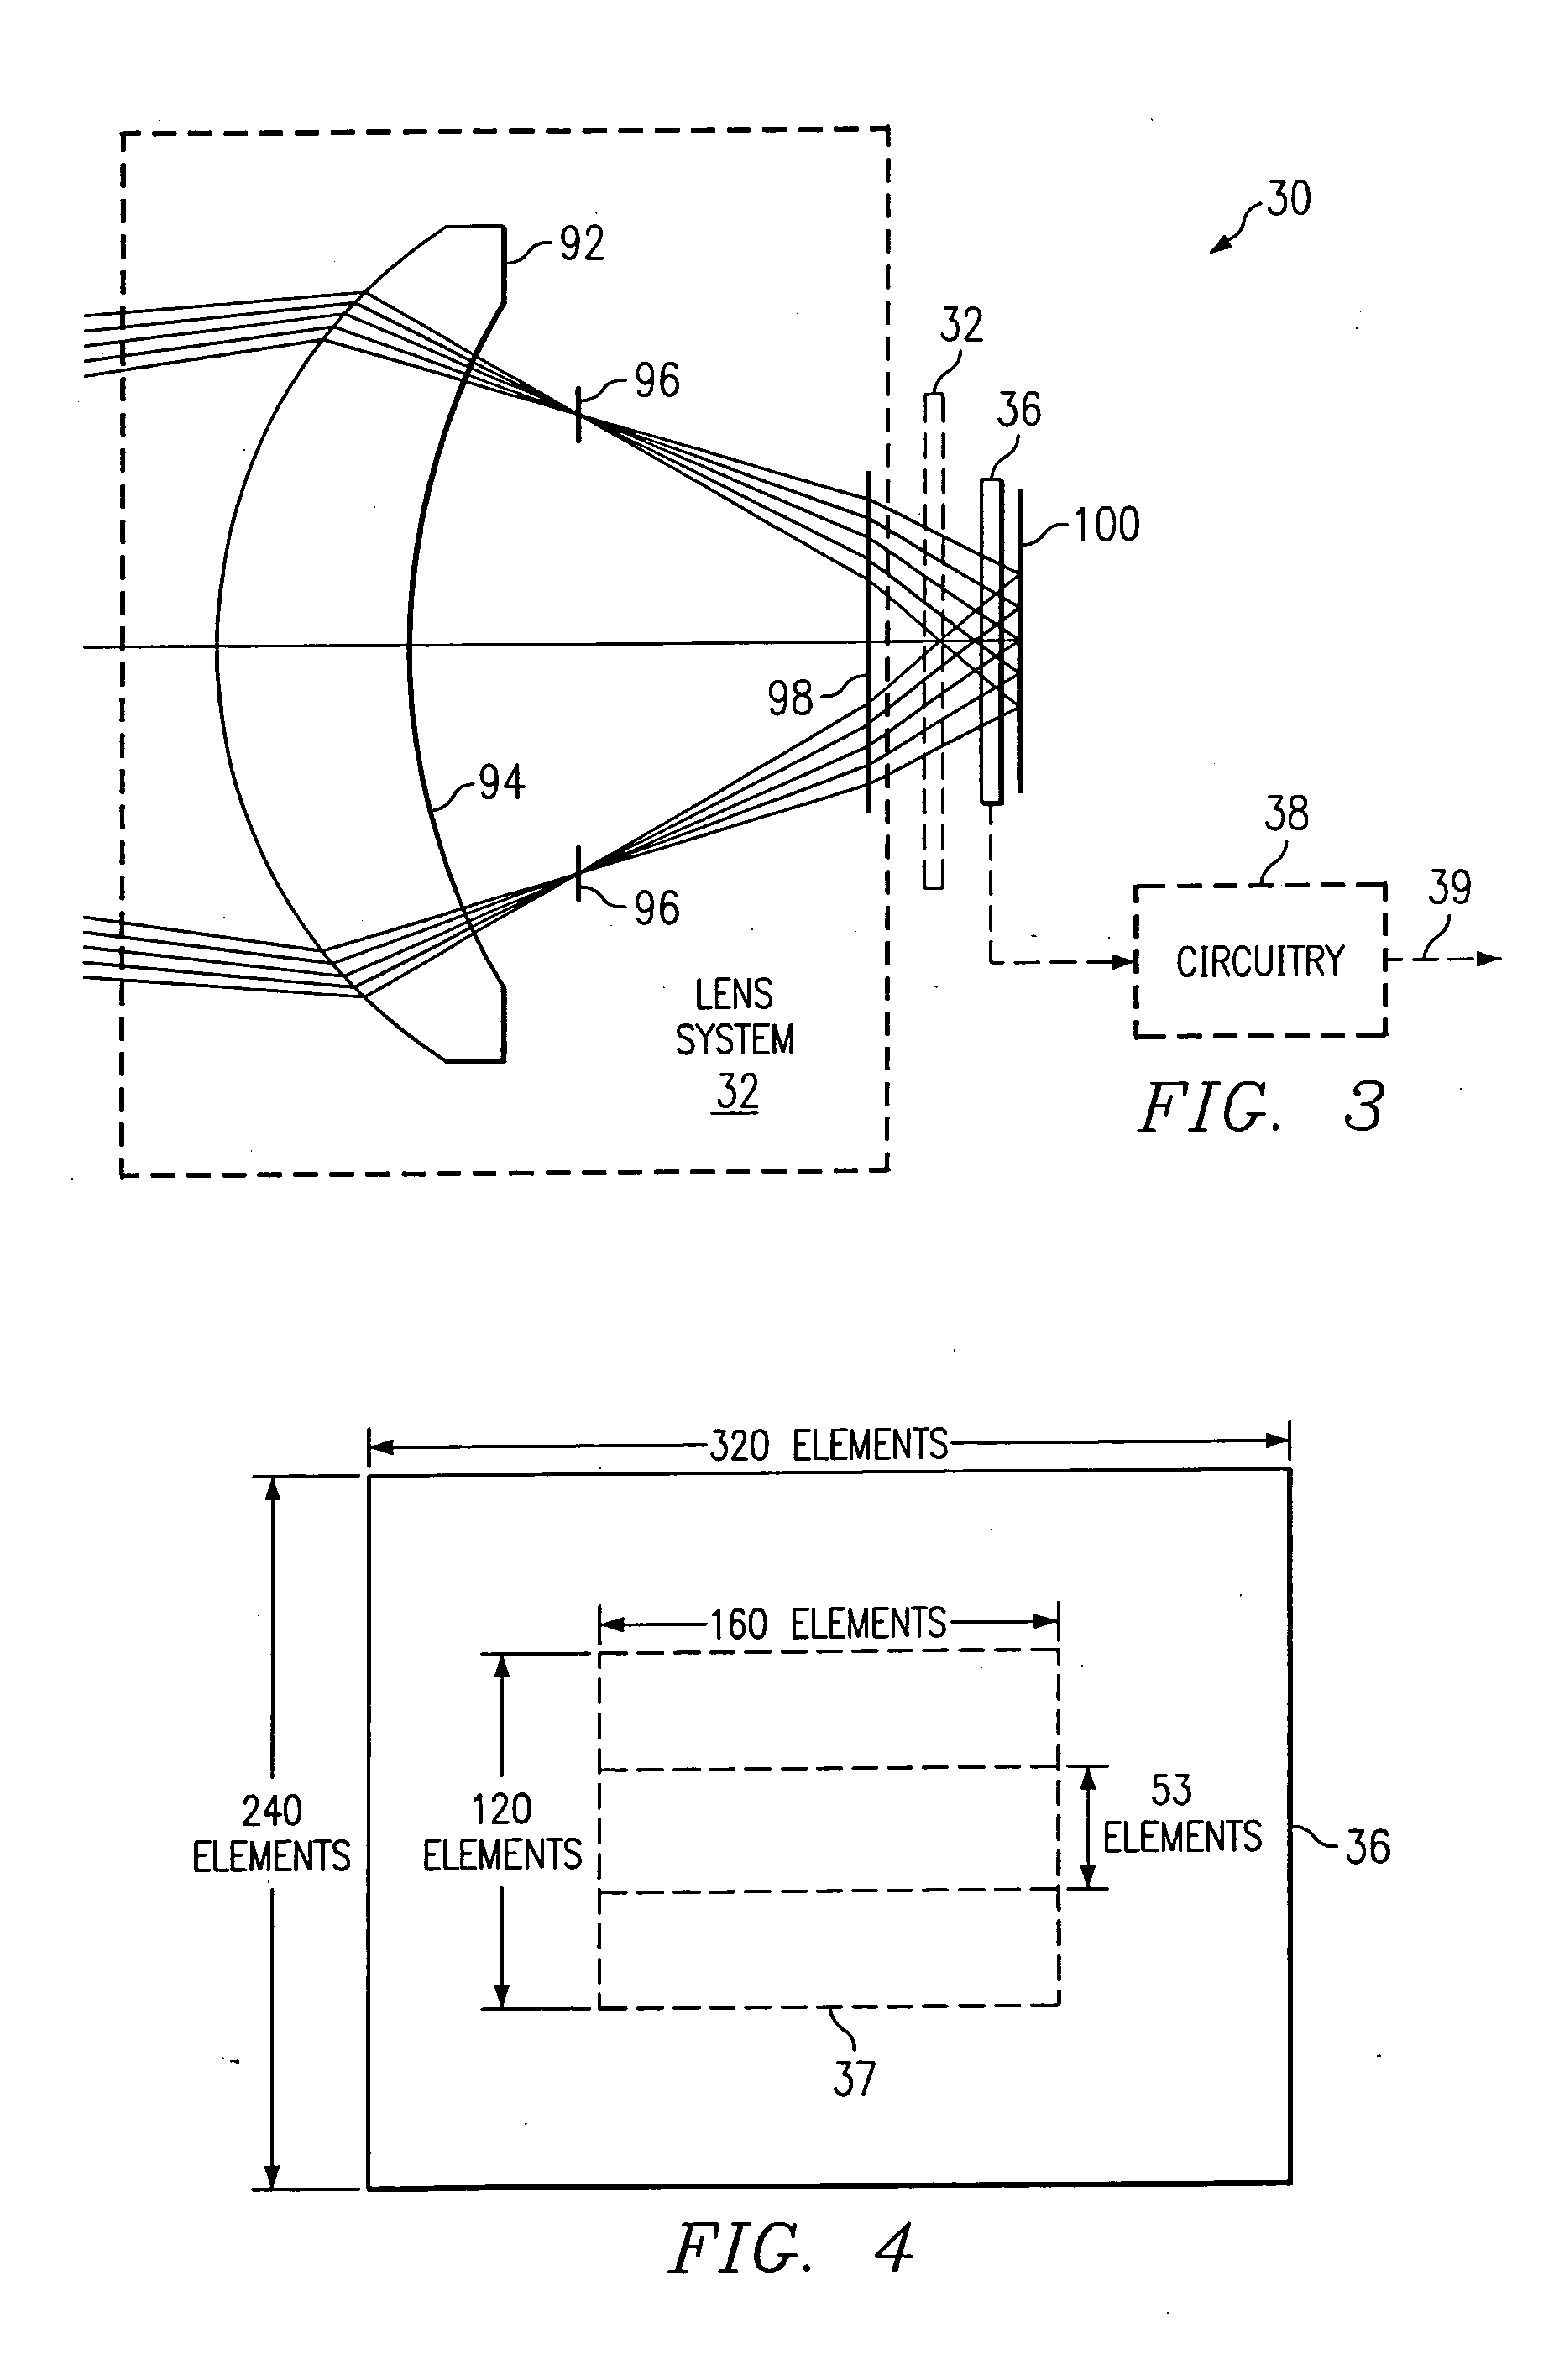 System and method for forming images for display in a vehicle